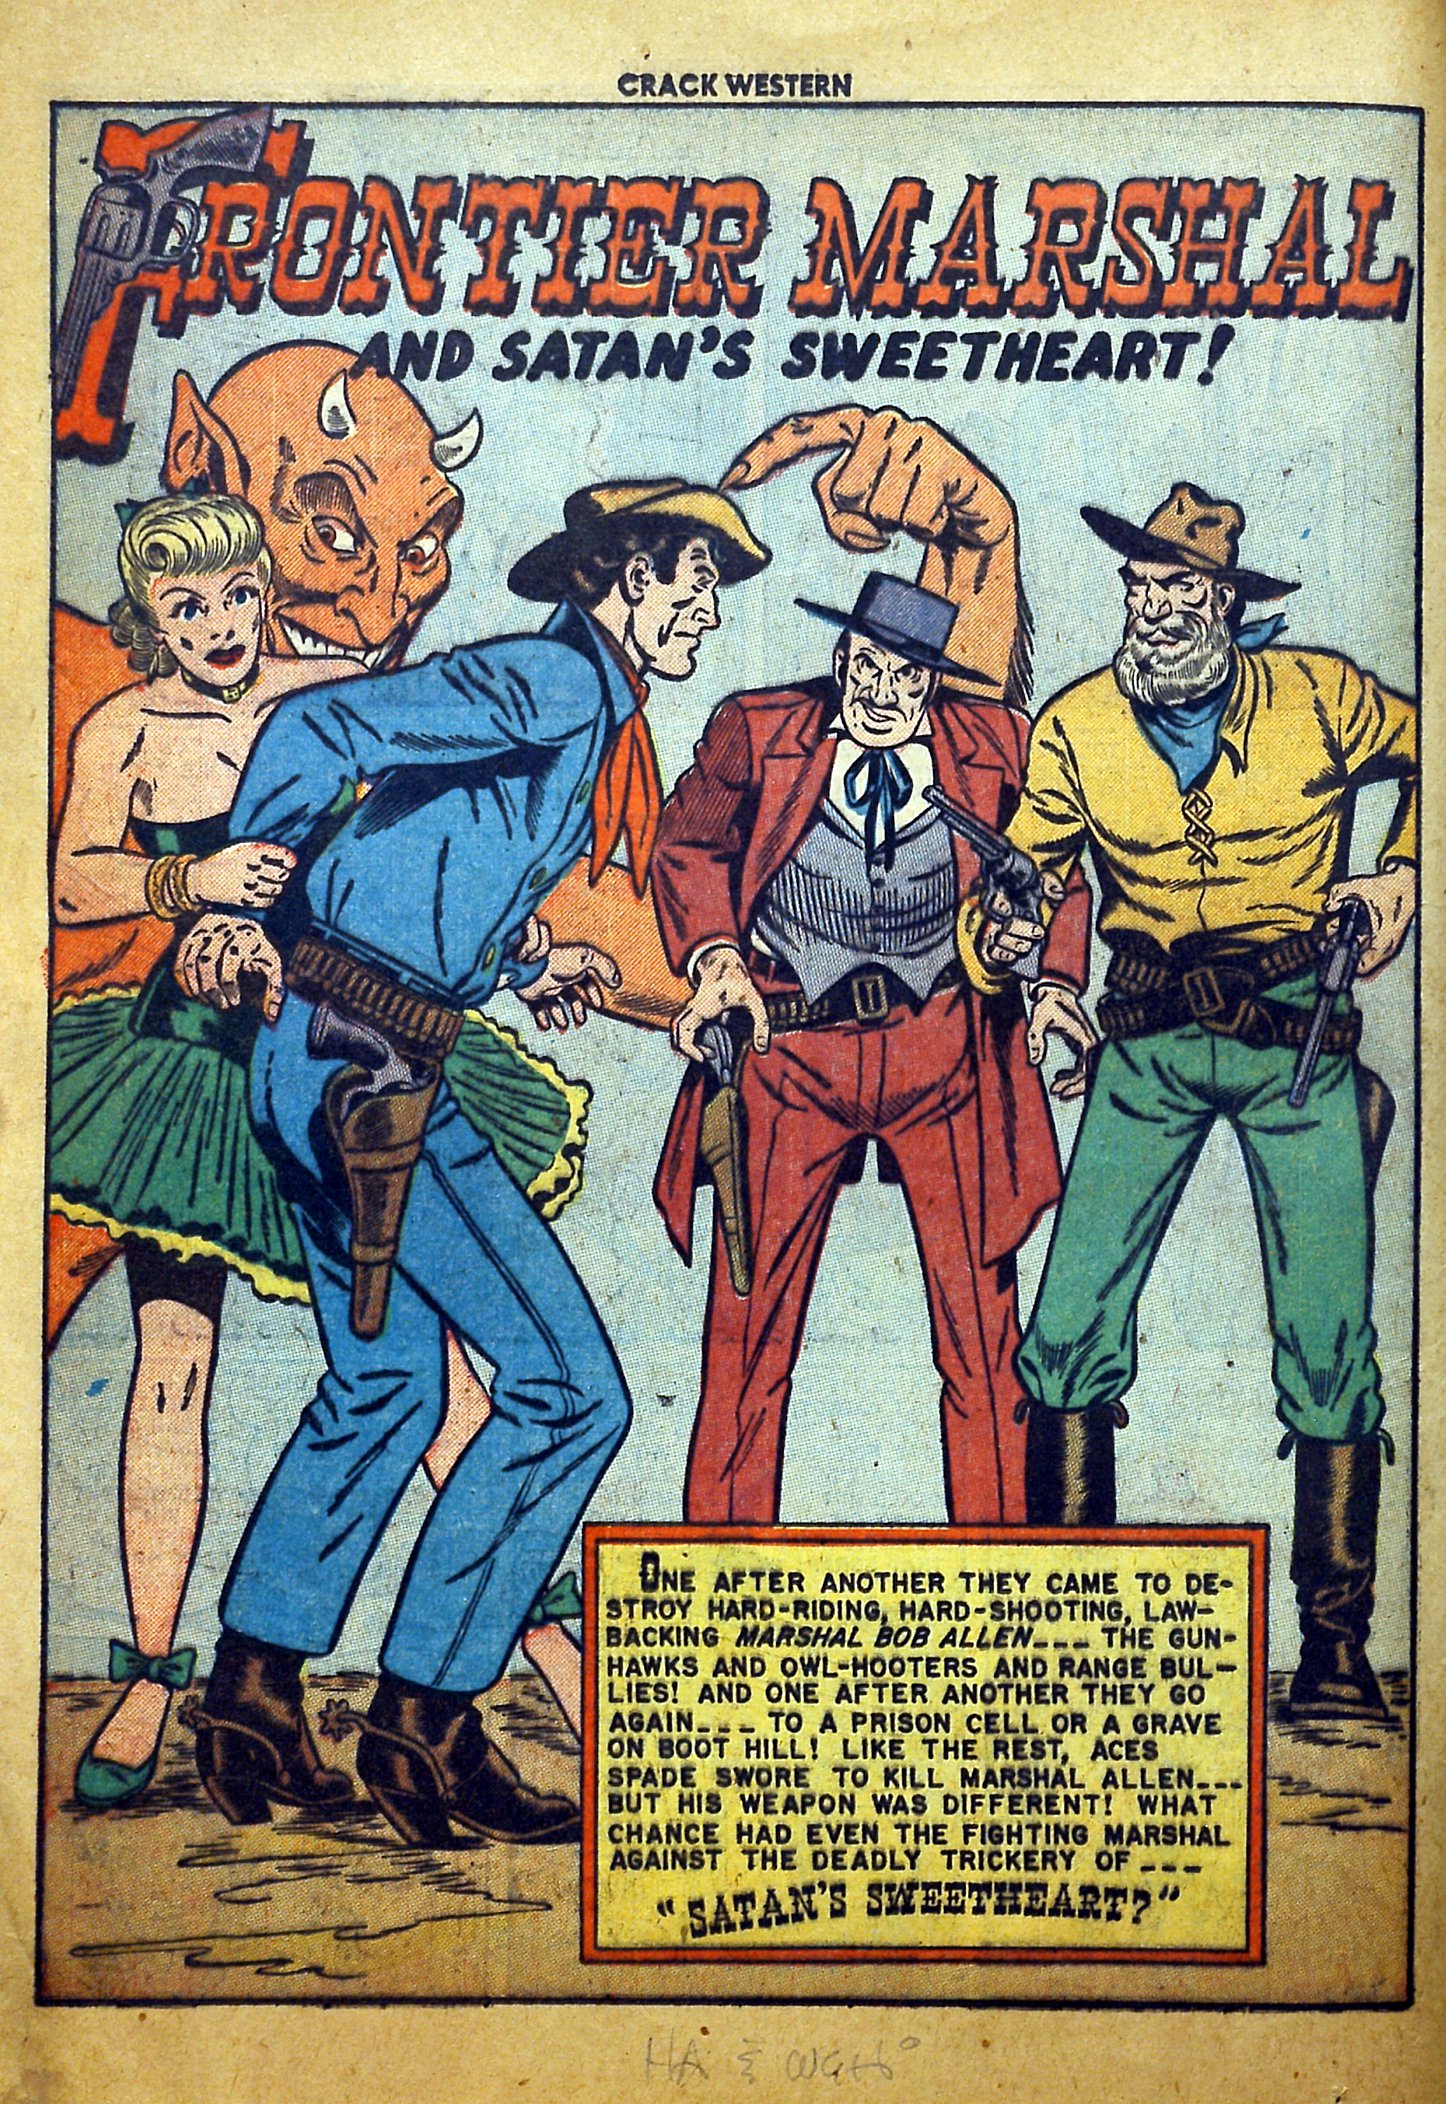 Read online Crack Western comic -  Issue #70 - 16